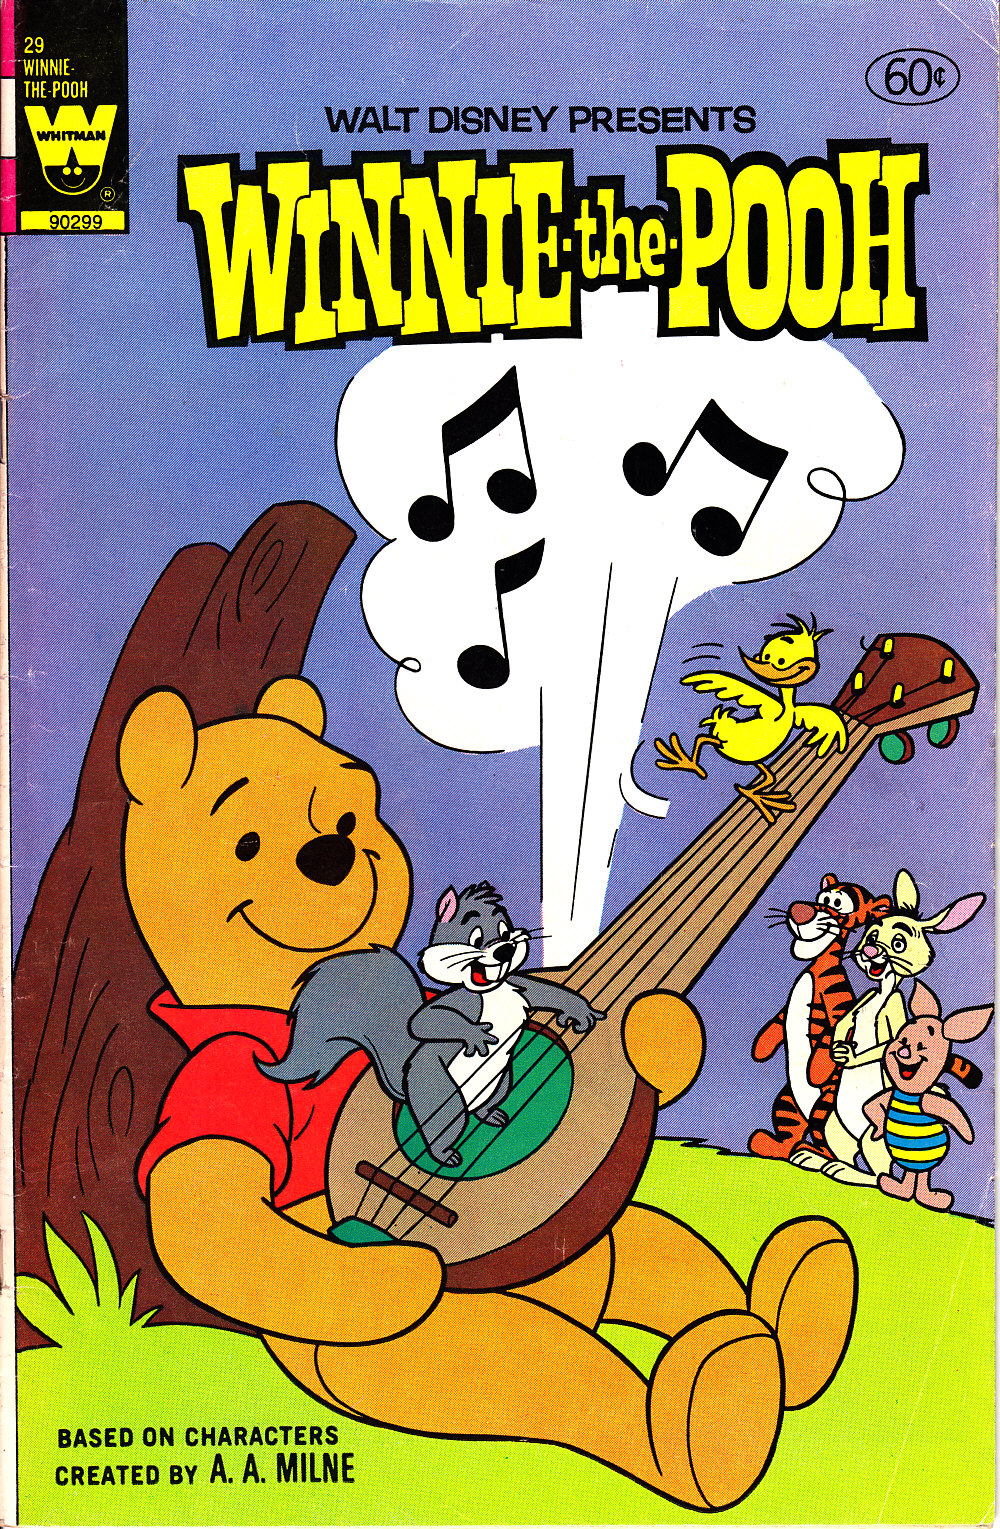 Read online Winnie-the-Pooh comic -  Issue #29 - 1